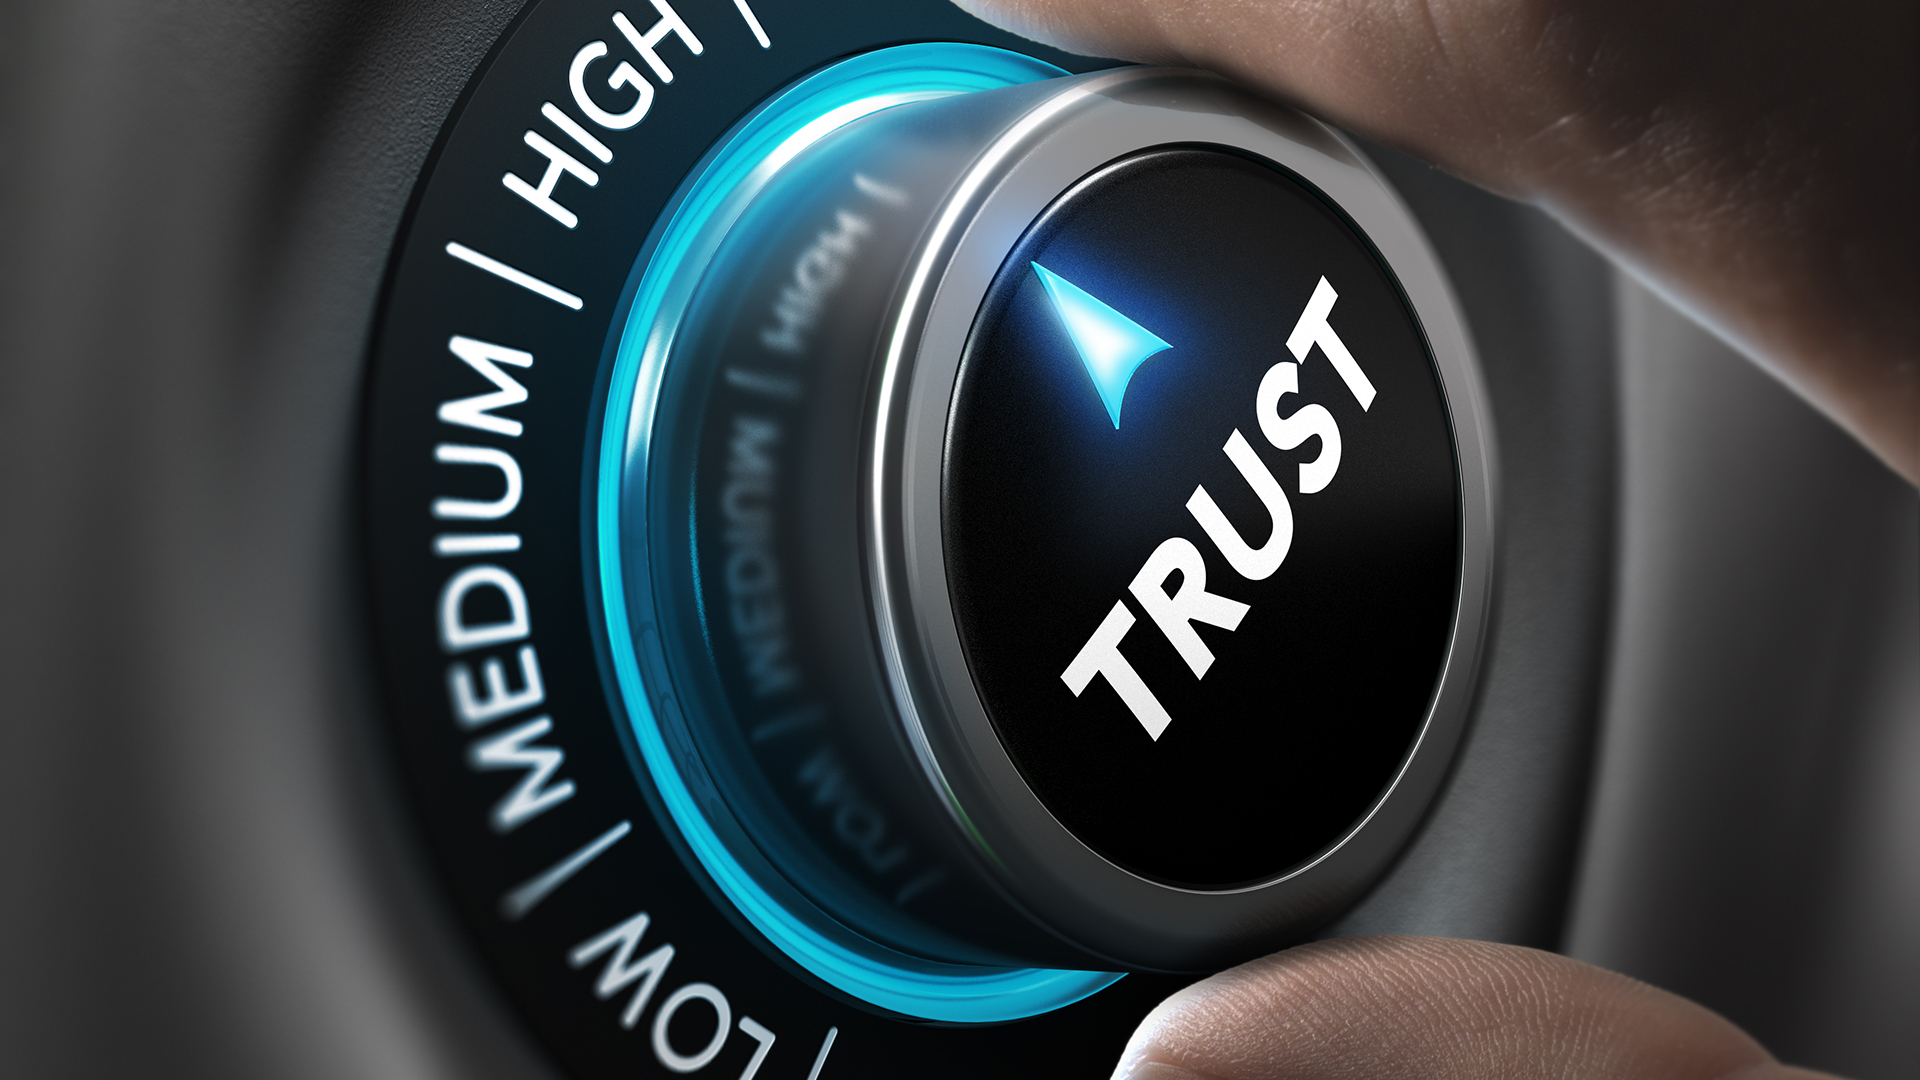 Tough times increasing consumers' desire for reliable, trustworthy companies